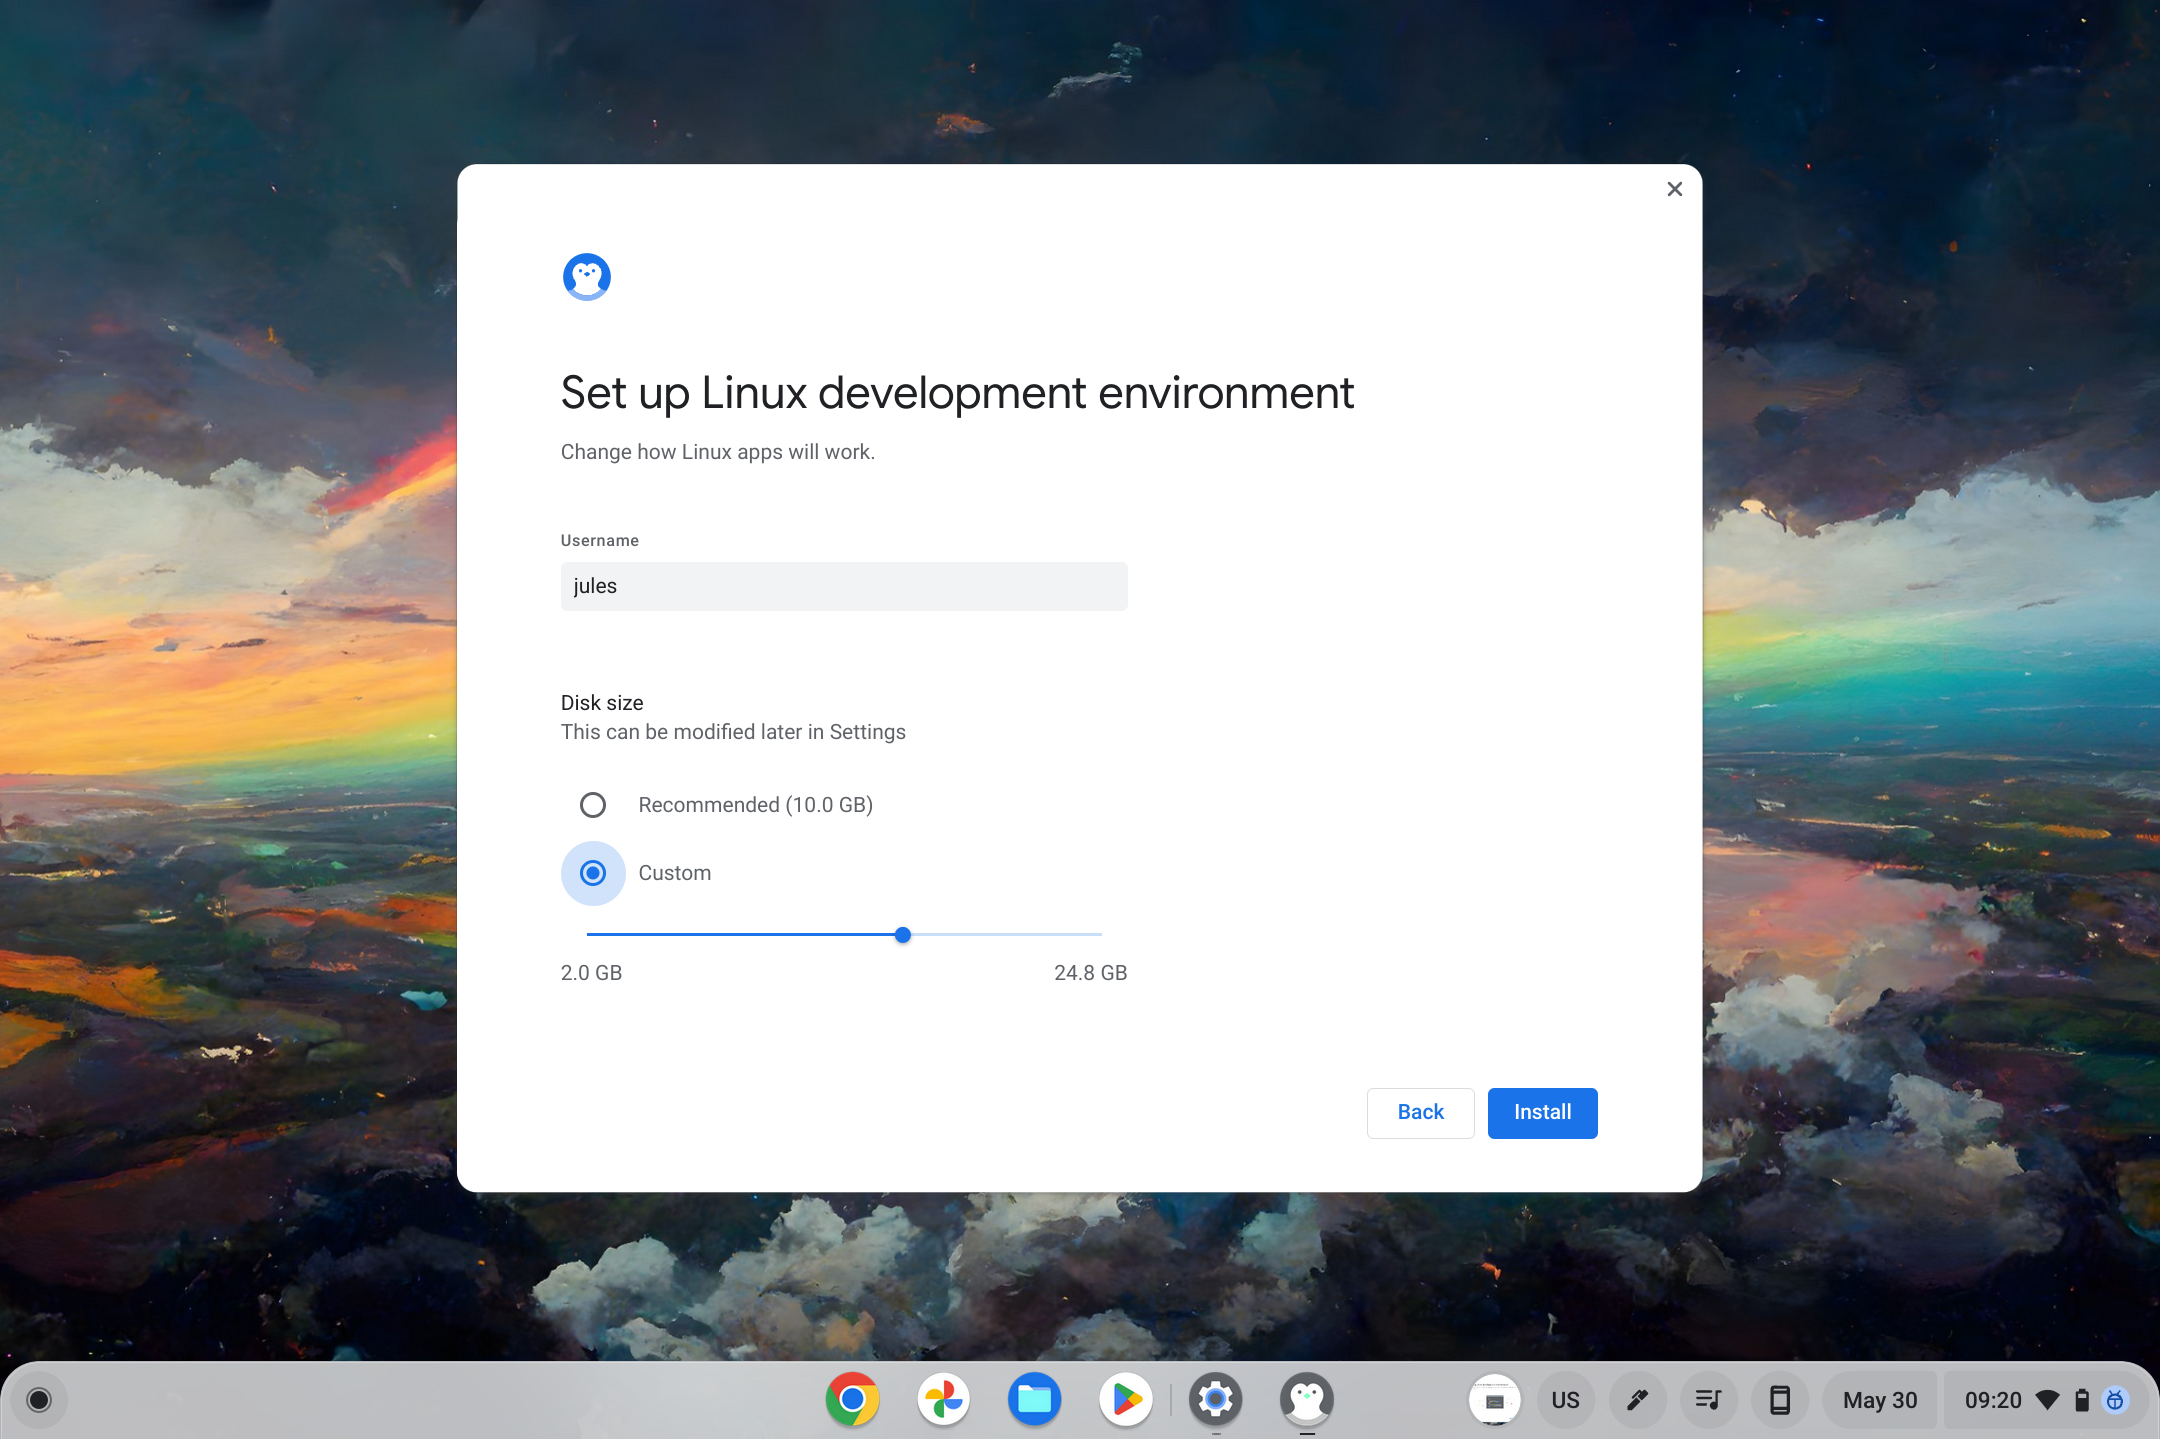 ChromeOS window for setting up a Linux development environment.